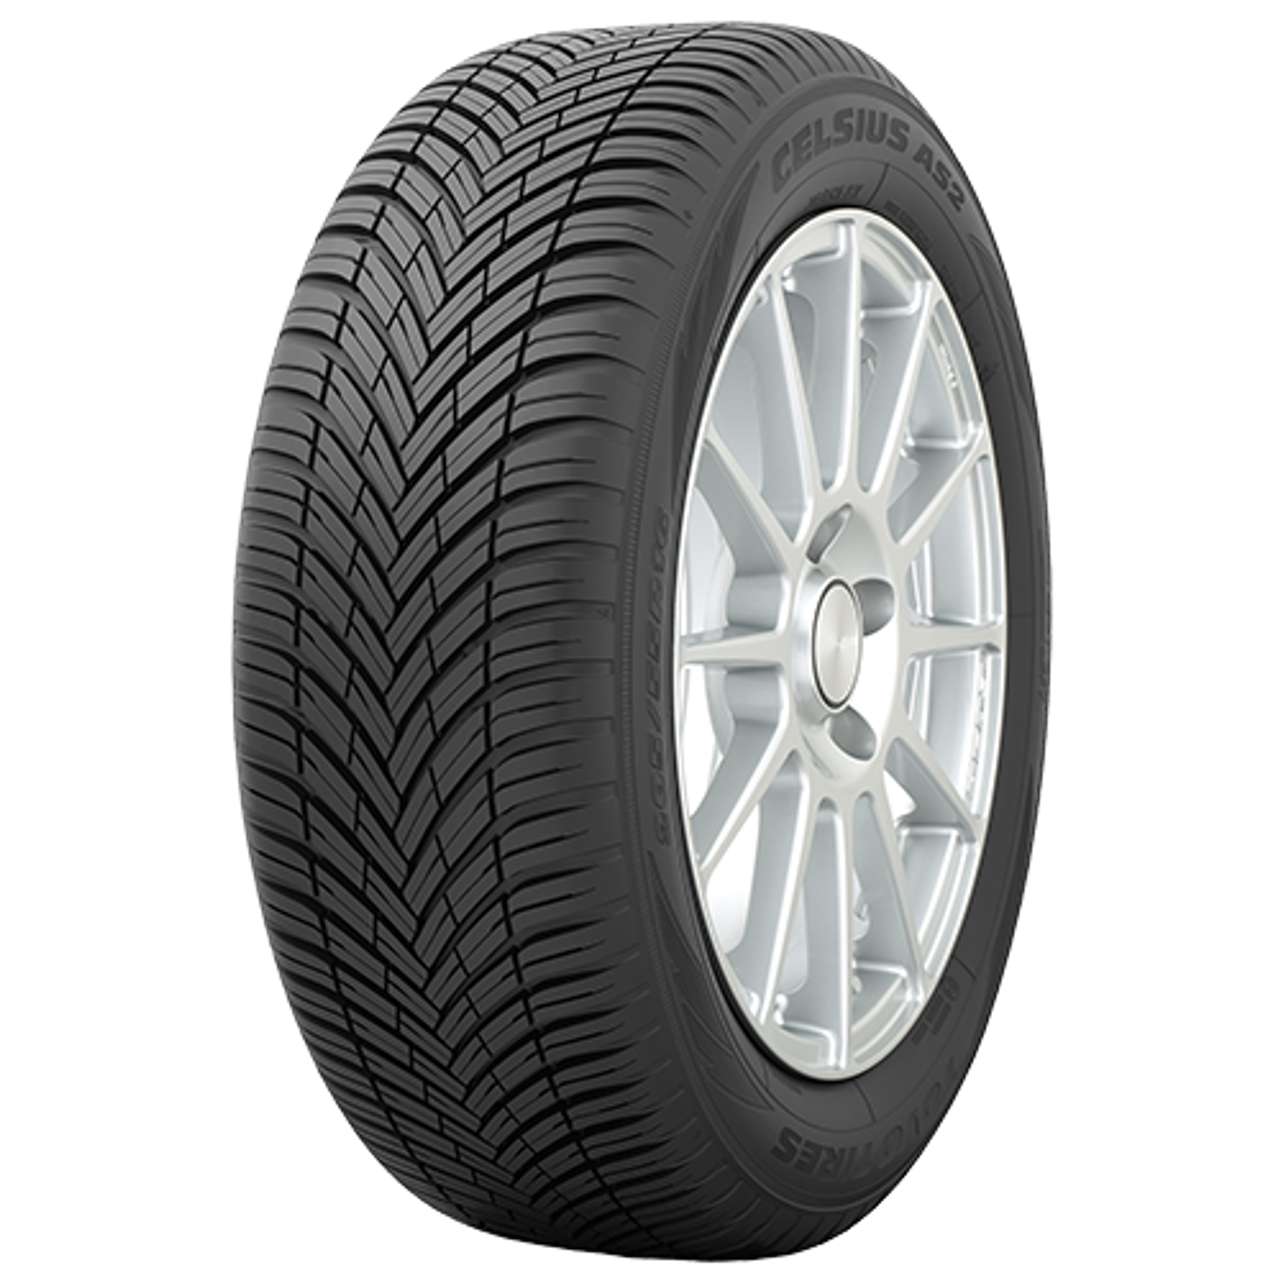 TOYO CELSIUS AS2 205/55R17 95W BSW